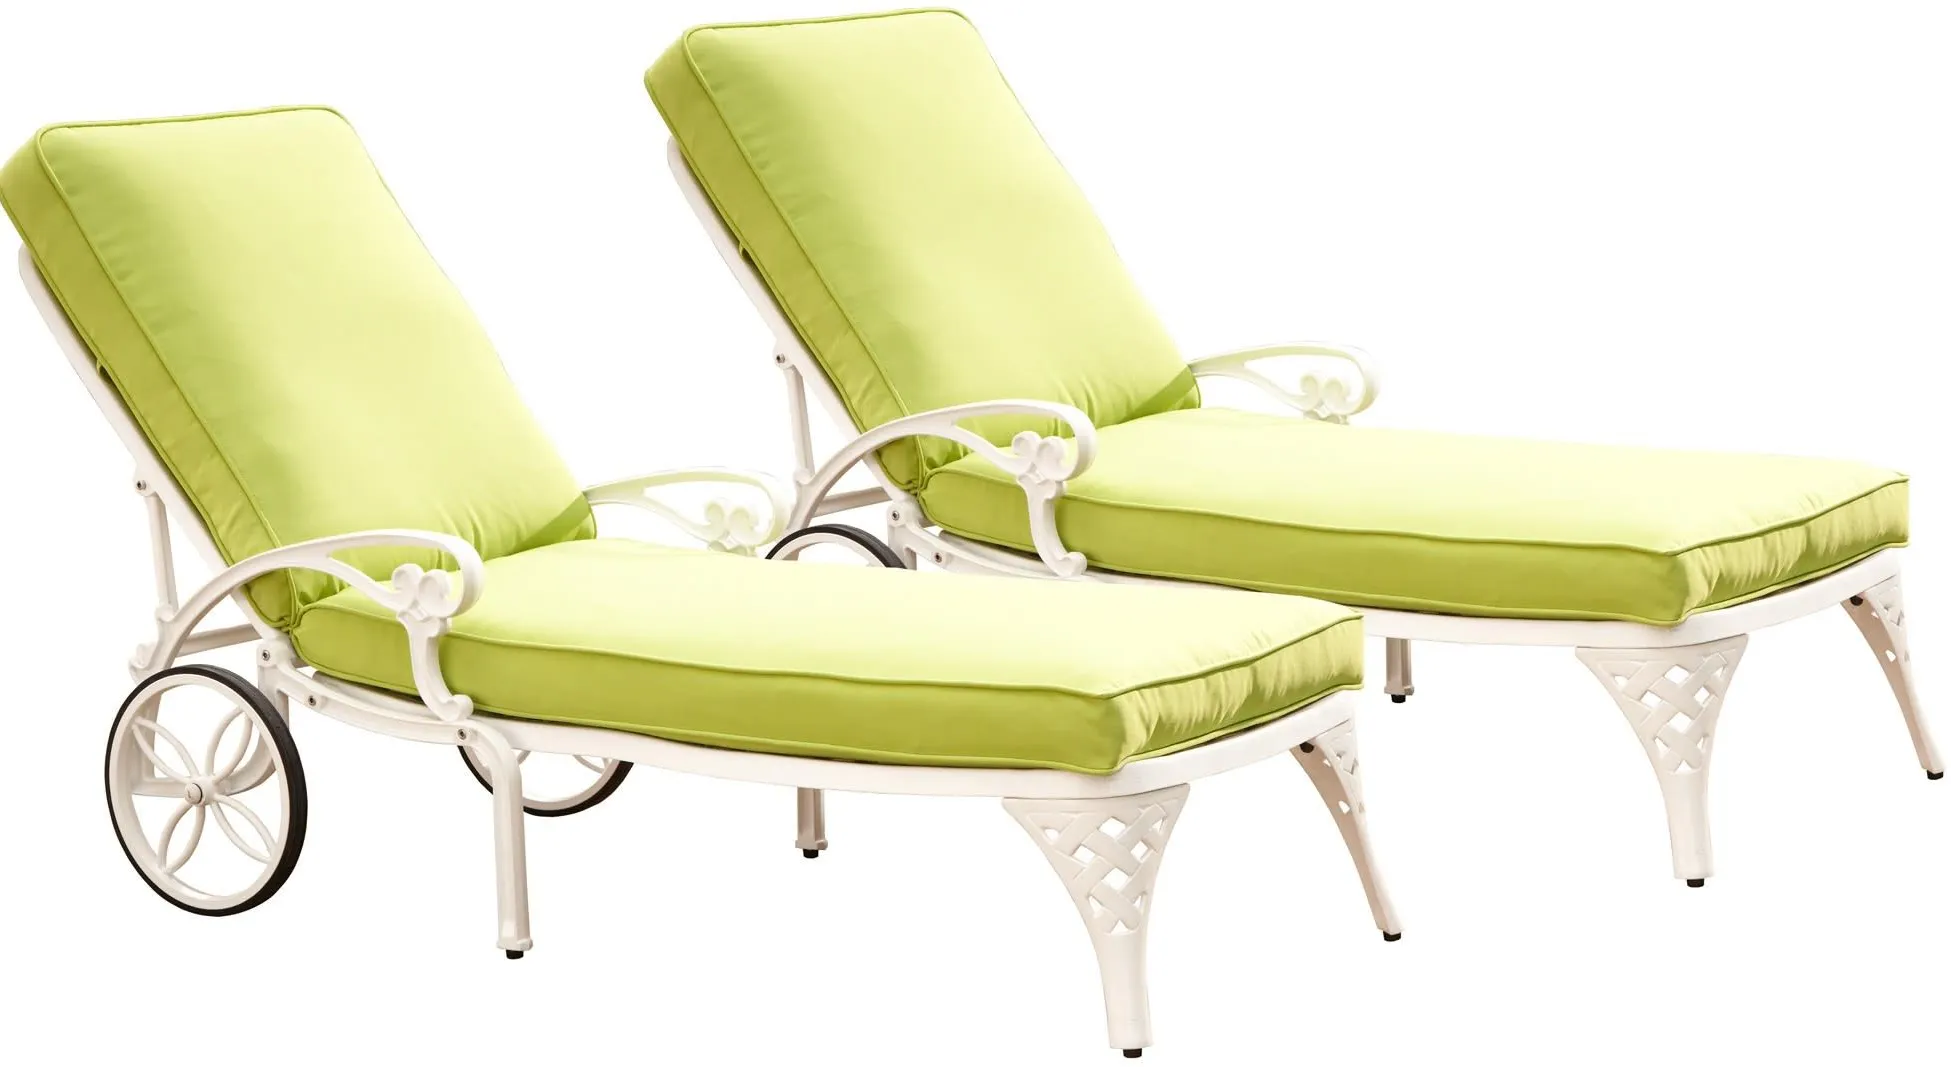 homestyles® Biscayne 2-Piece Off-White Chaise Lounge Chairs with Cushions